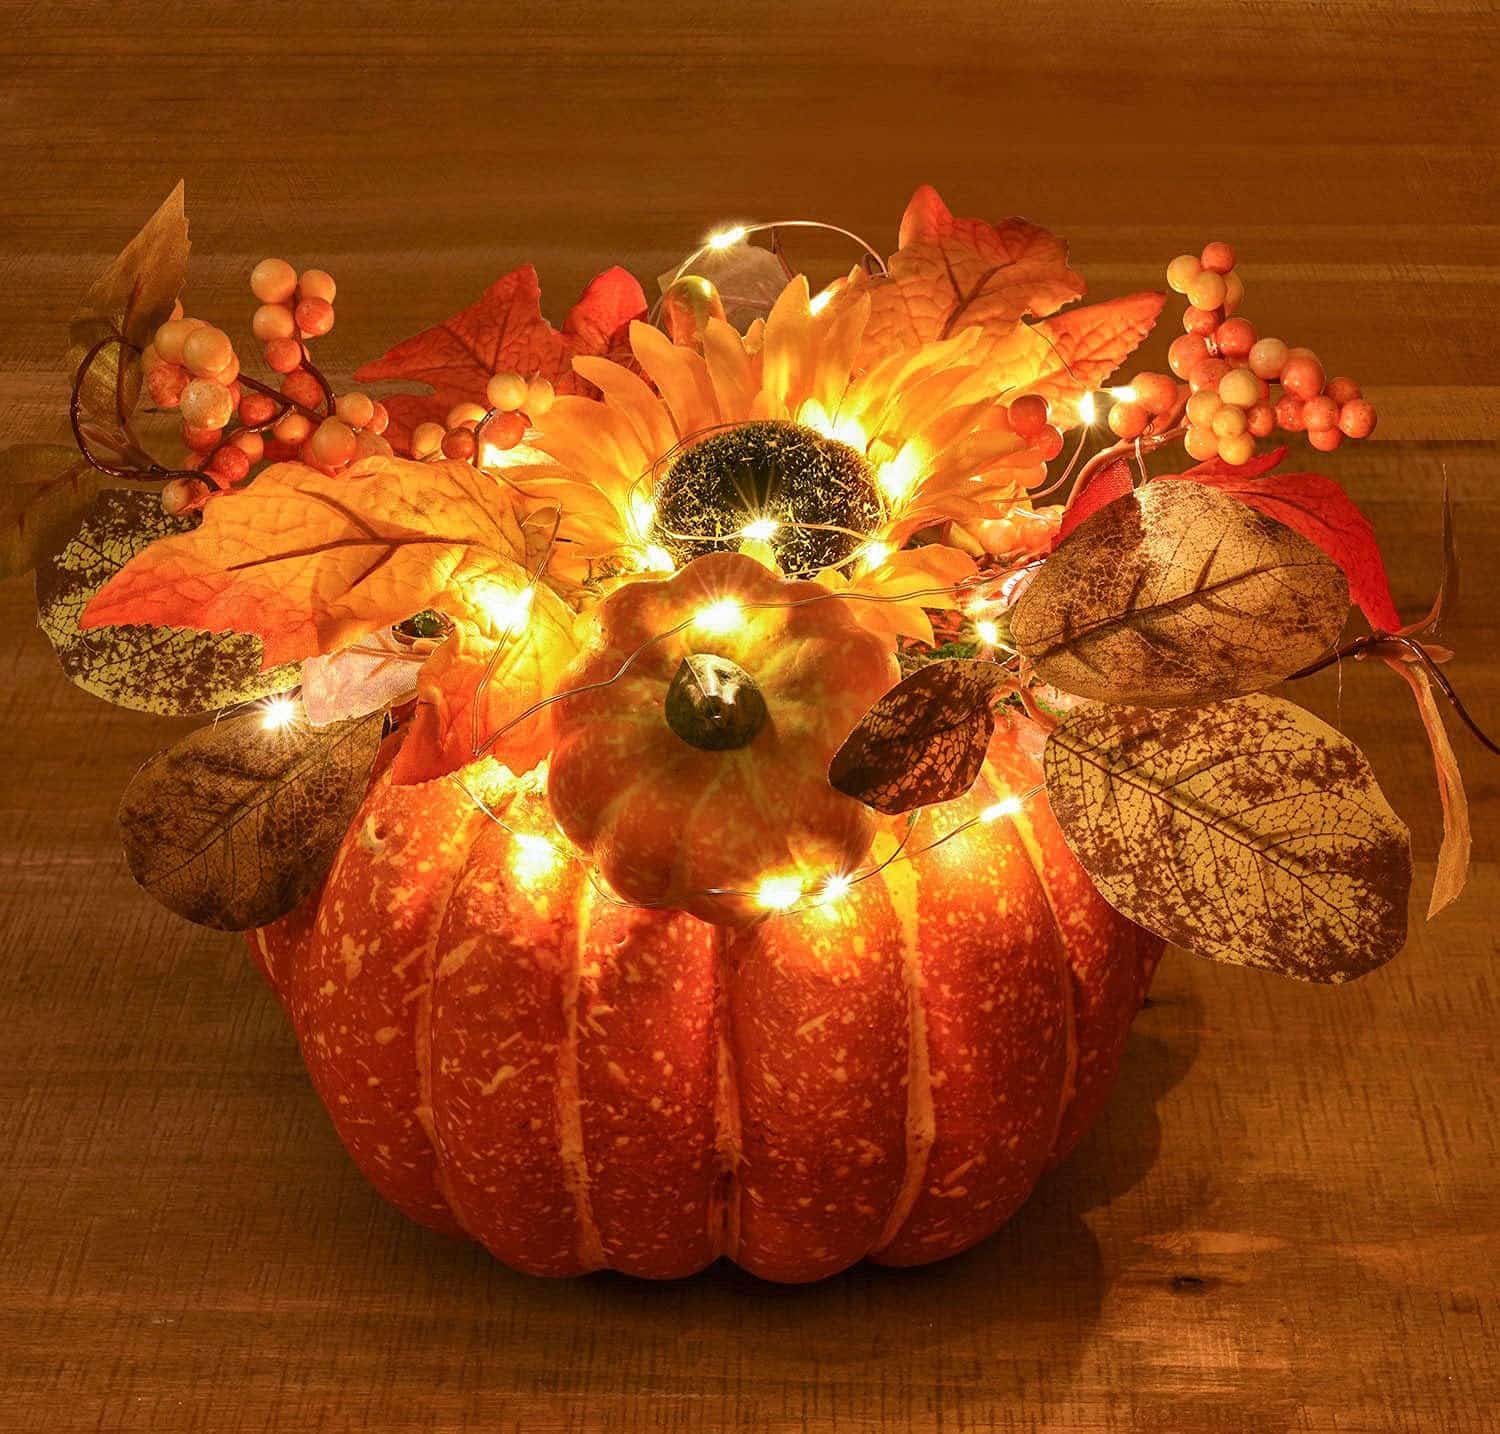 Lvydec Large Pumpkin Fall Table Decoration, Artificial Pumpkin with Maple Leaves Sunflower Berries and LED Lights for Fall Table Centerpieces Thanksgiving Decor